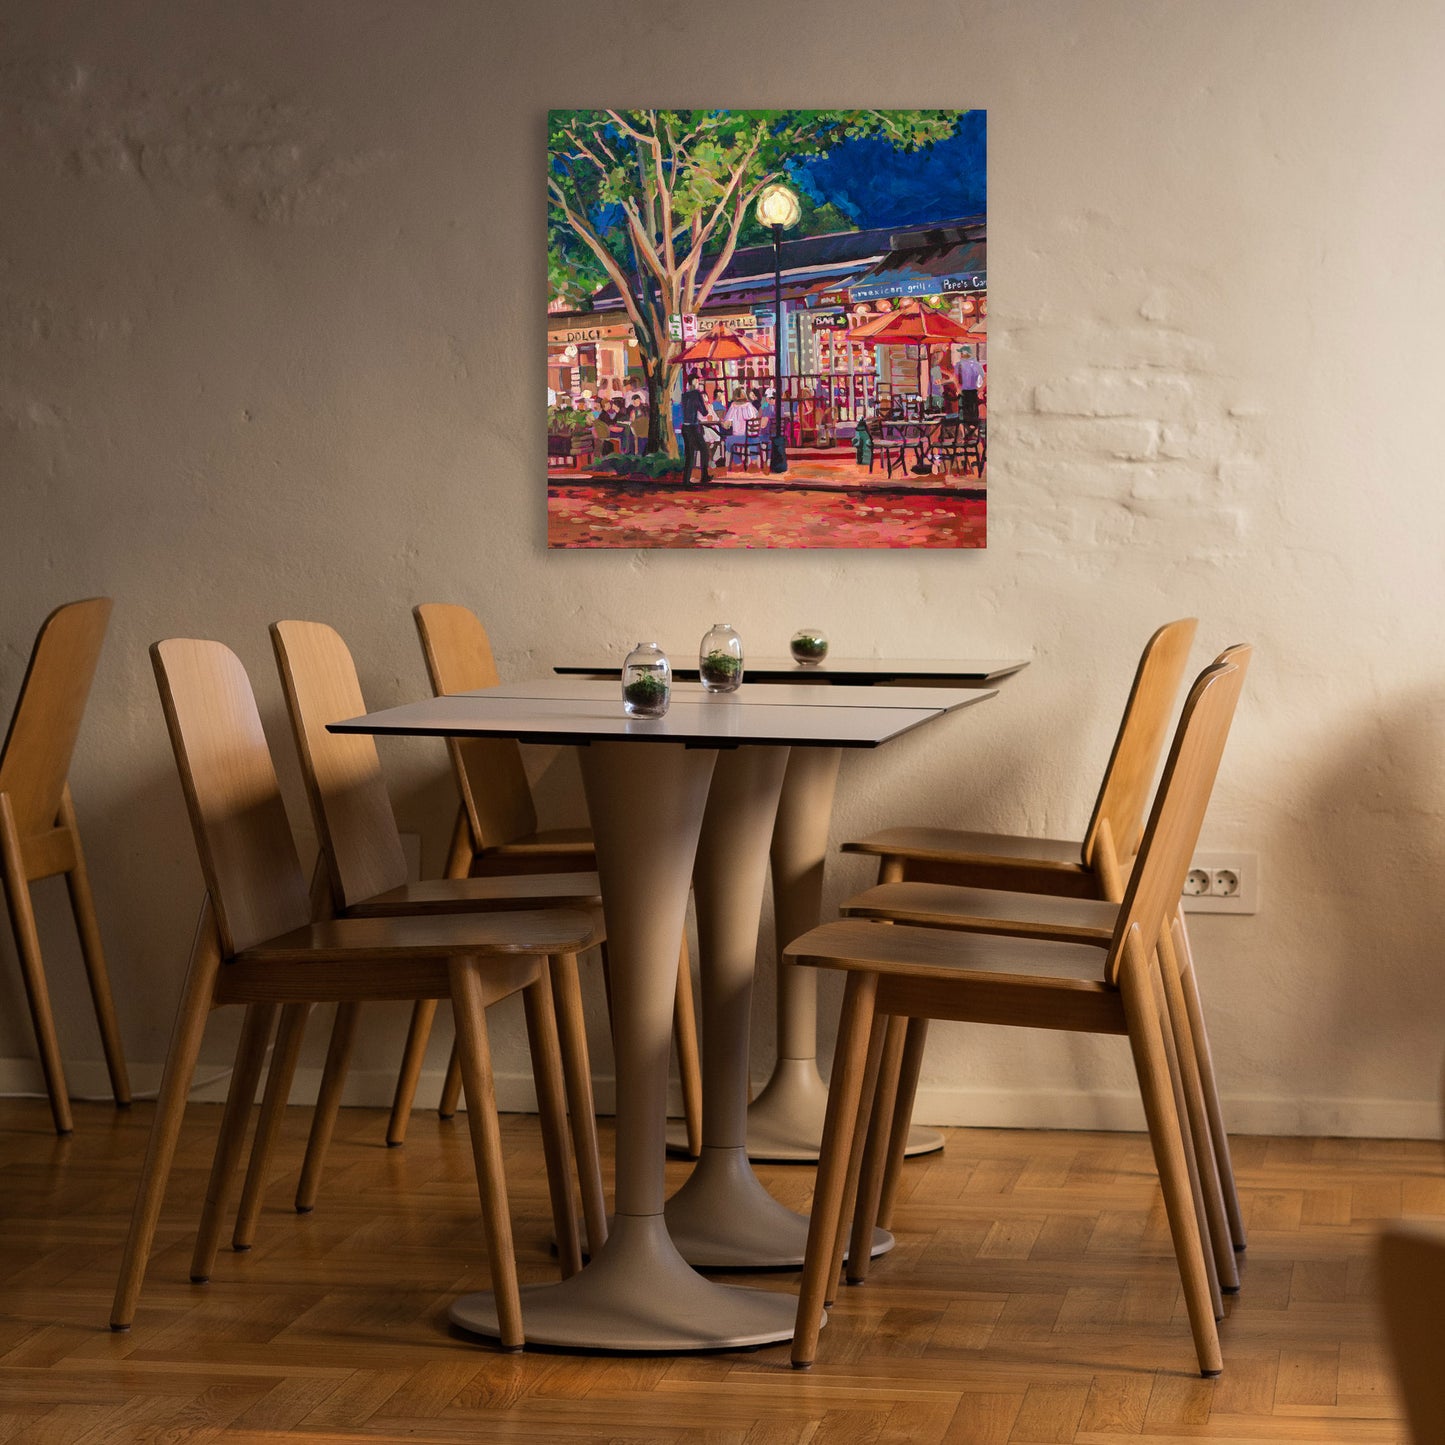 Painting hung on wall at restaurant with tables: Vibrant nightscene painting of outdoor cafe with tables and trees dramatic lighting, Winter Park Nightlife scene 3, umbrellas and tables and tree